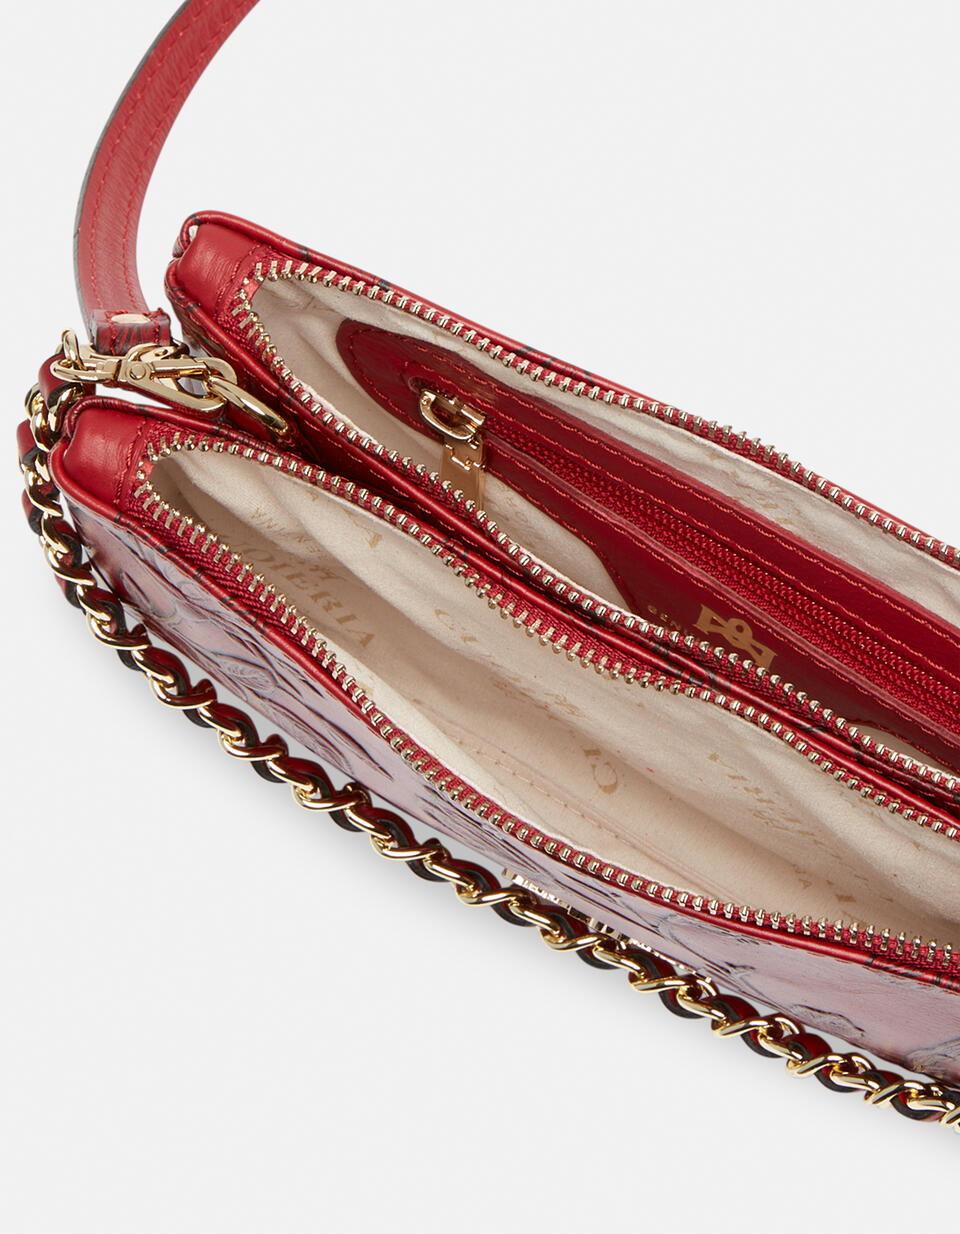 Double clutch bag in rose embossed printed leather - Crossbody Bags - WOMEN'S BAGS | bags ROSSO - Crossbody Bags - WOMEN'S BAGS | bagsCuoieria Fiorentina